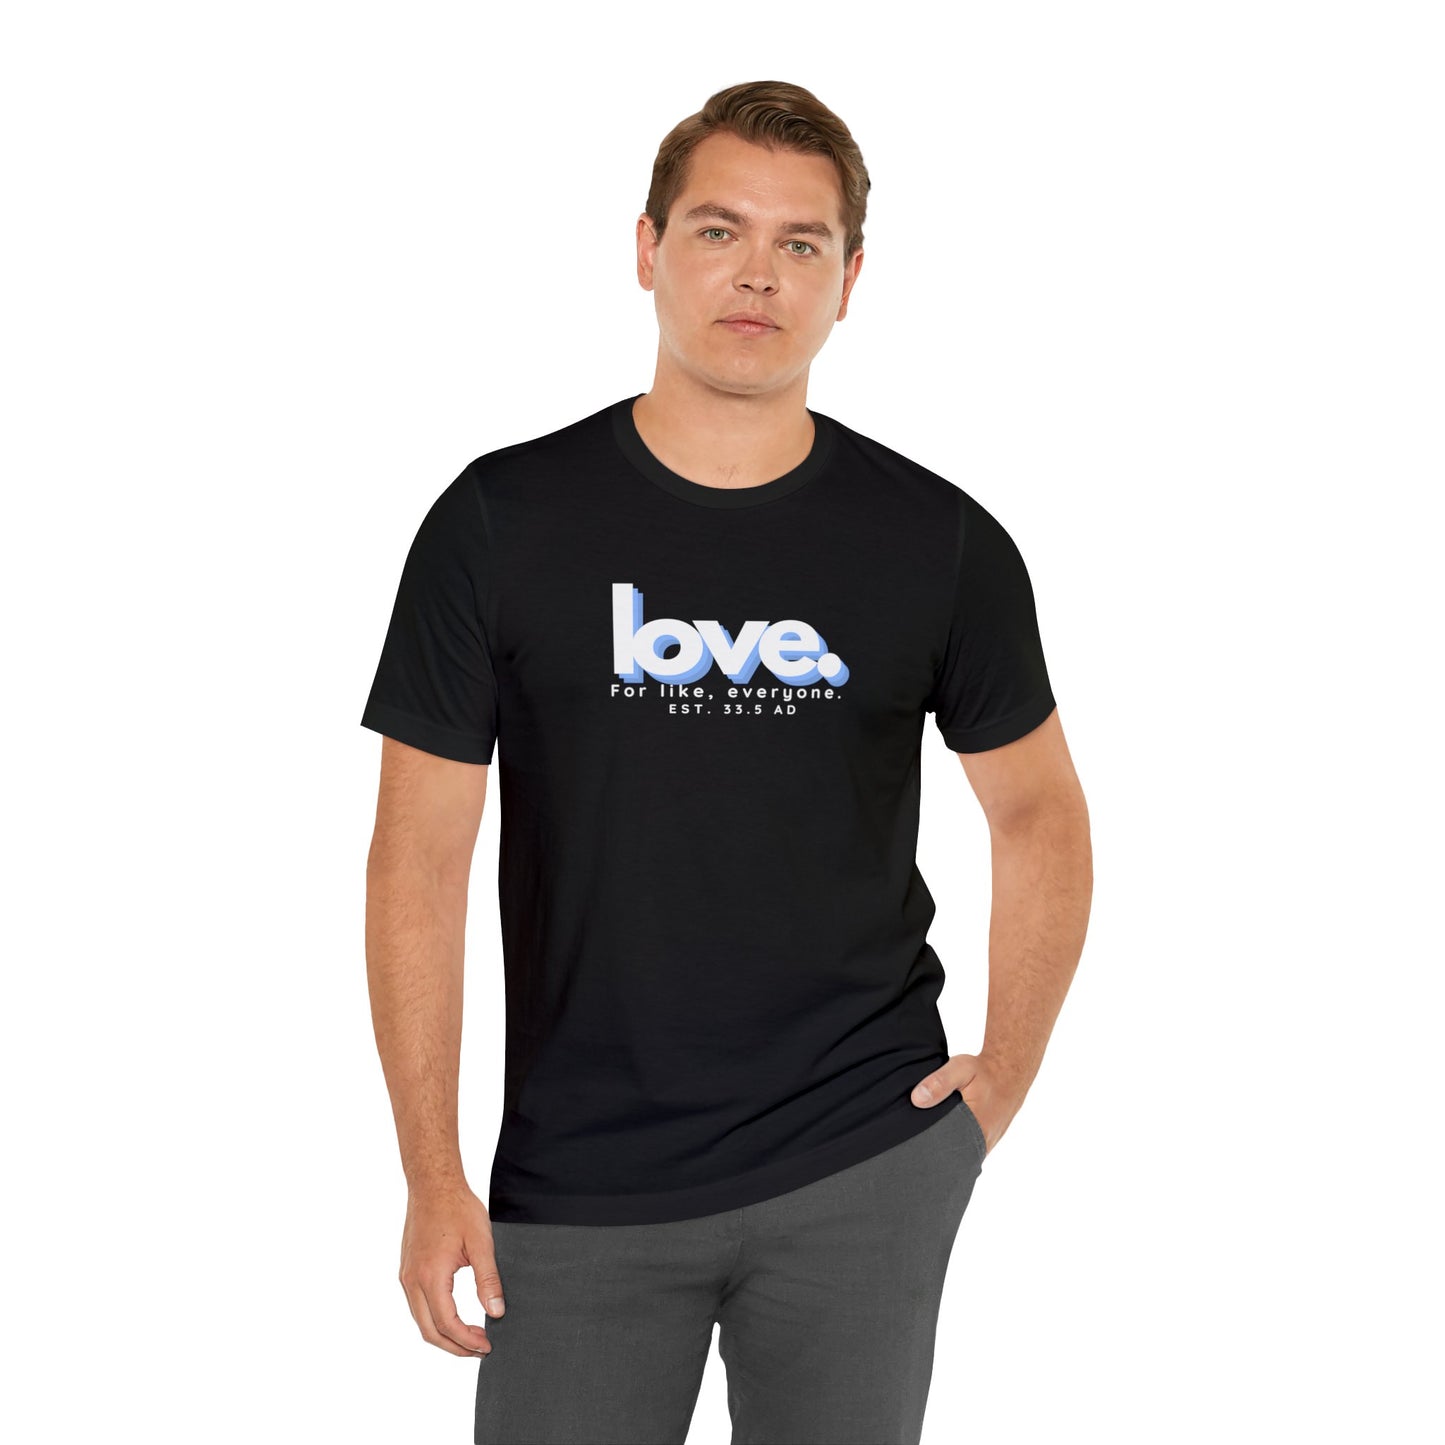 Love for everyone, Christian T-shirt for Men and Women